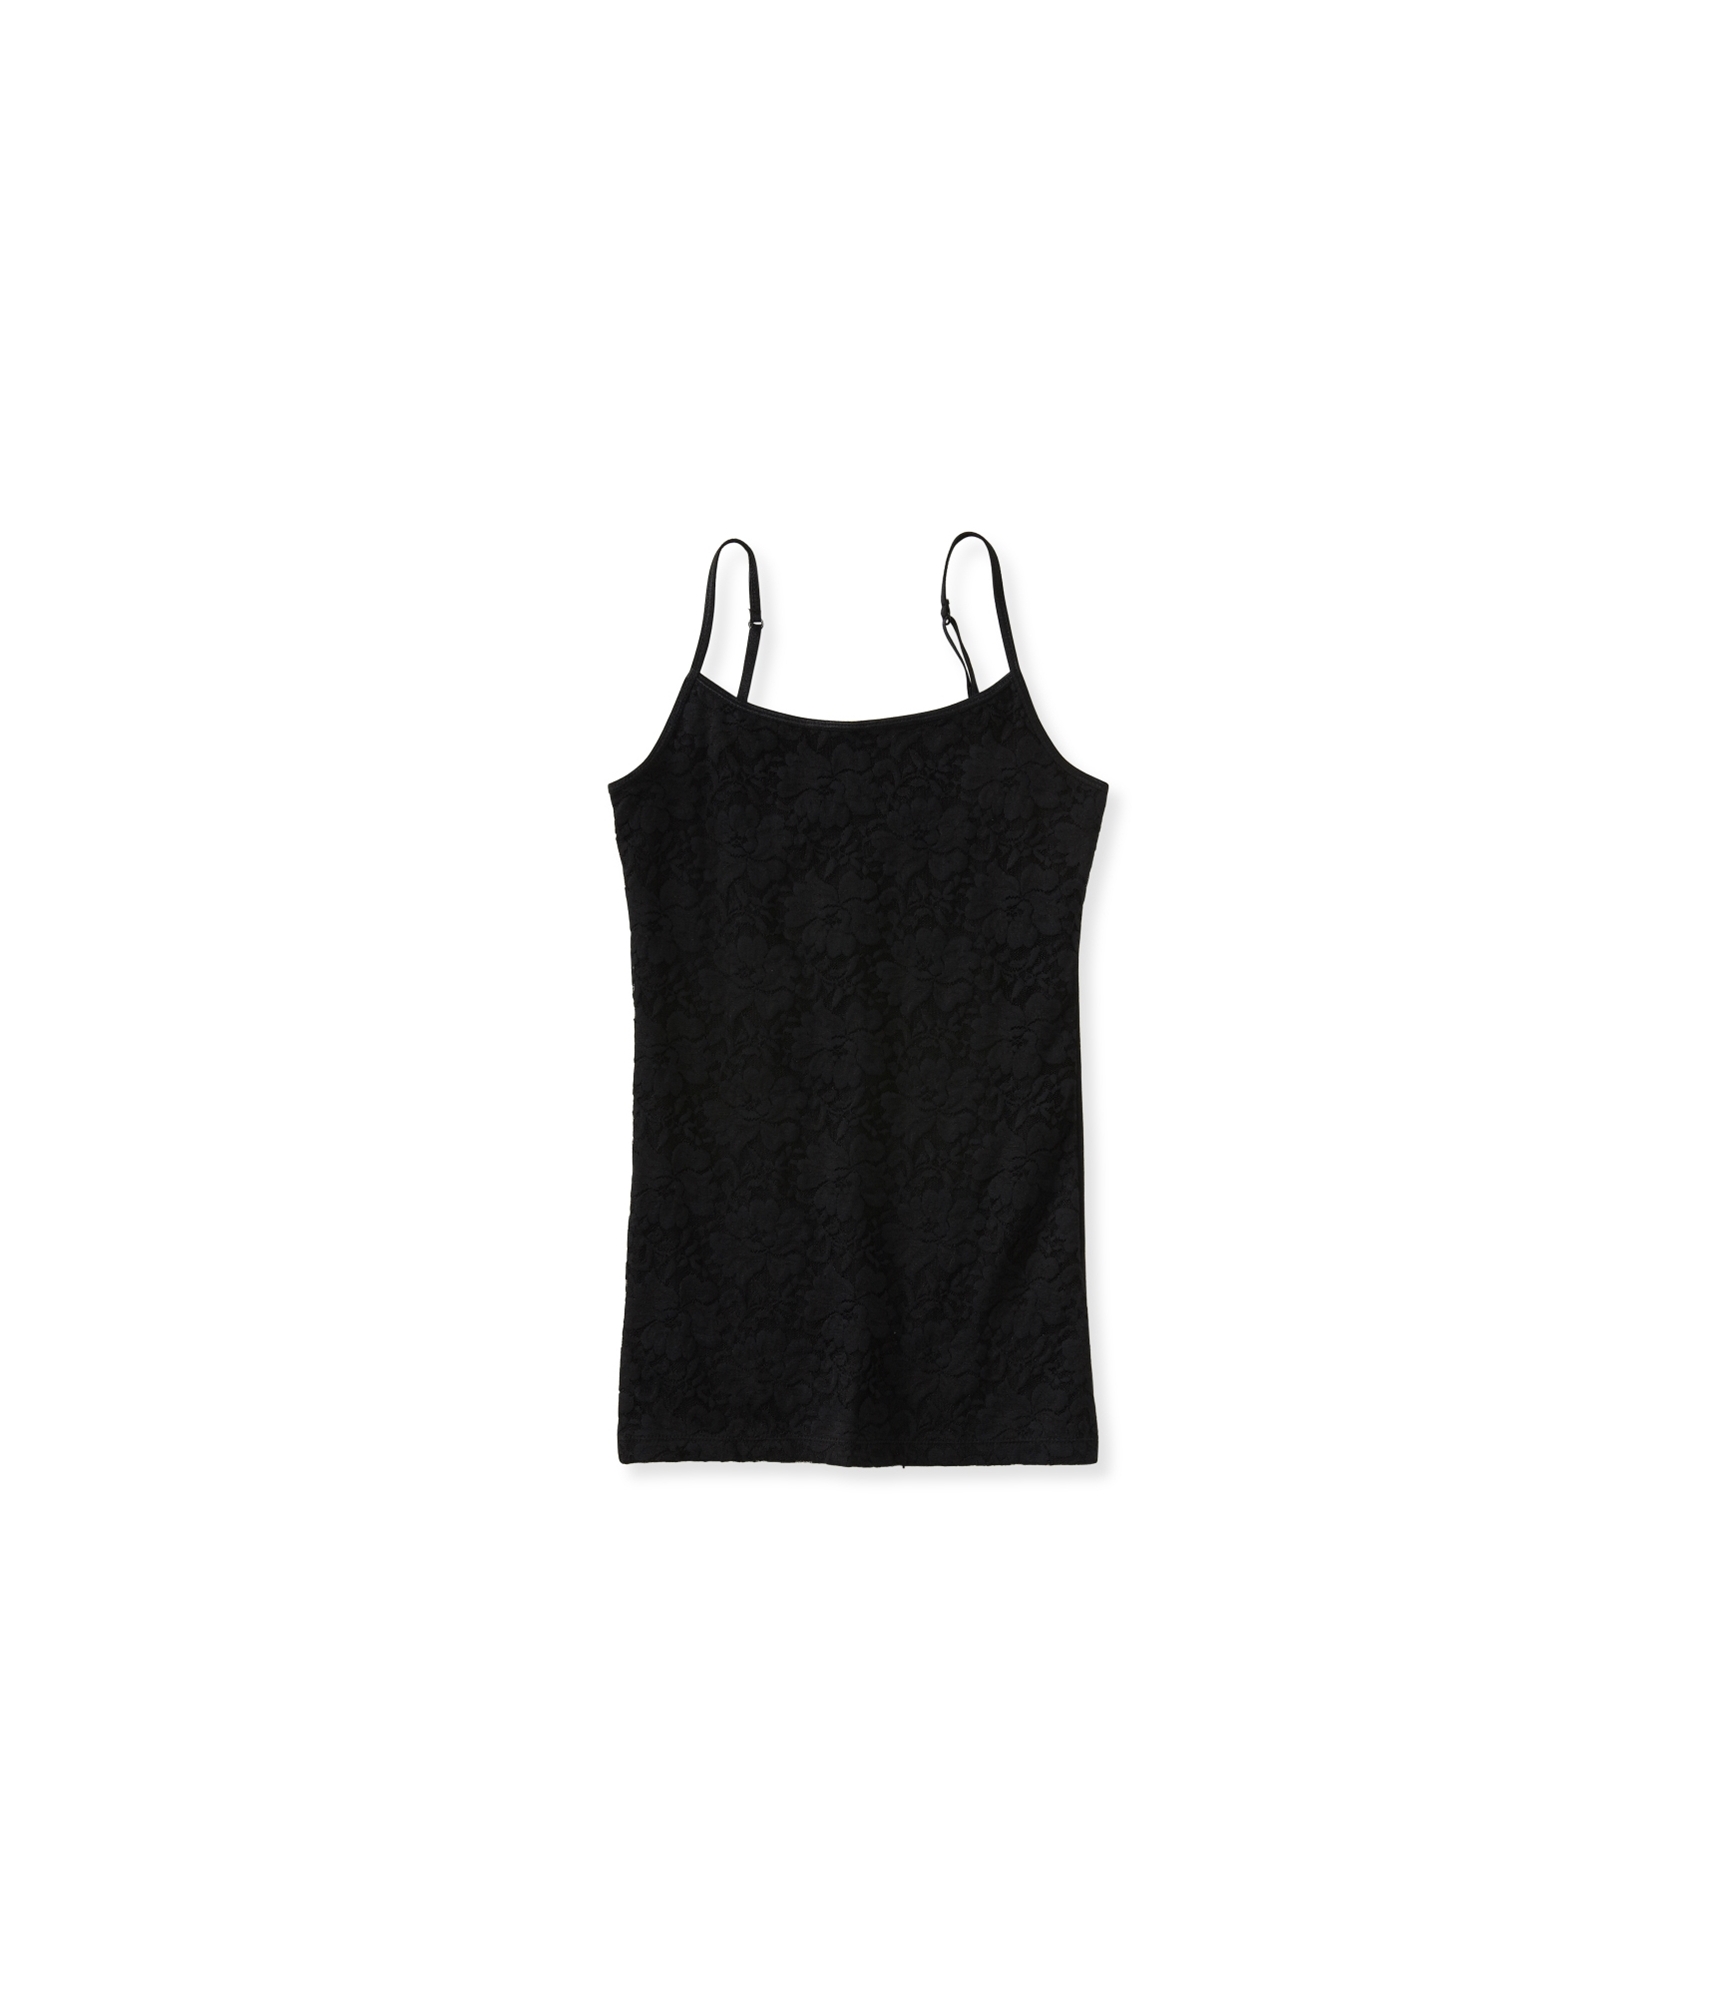 Buy a Aeropostale Womens Lace Front Cami Tank Top, TW2